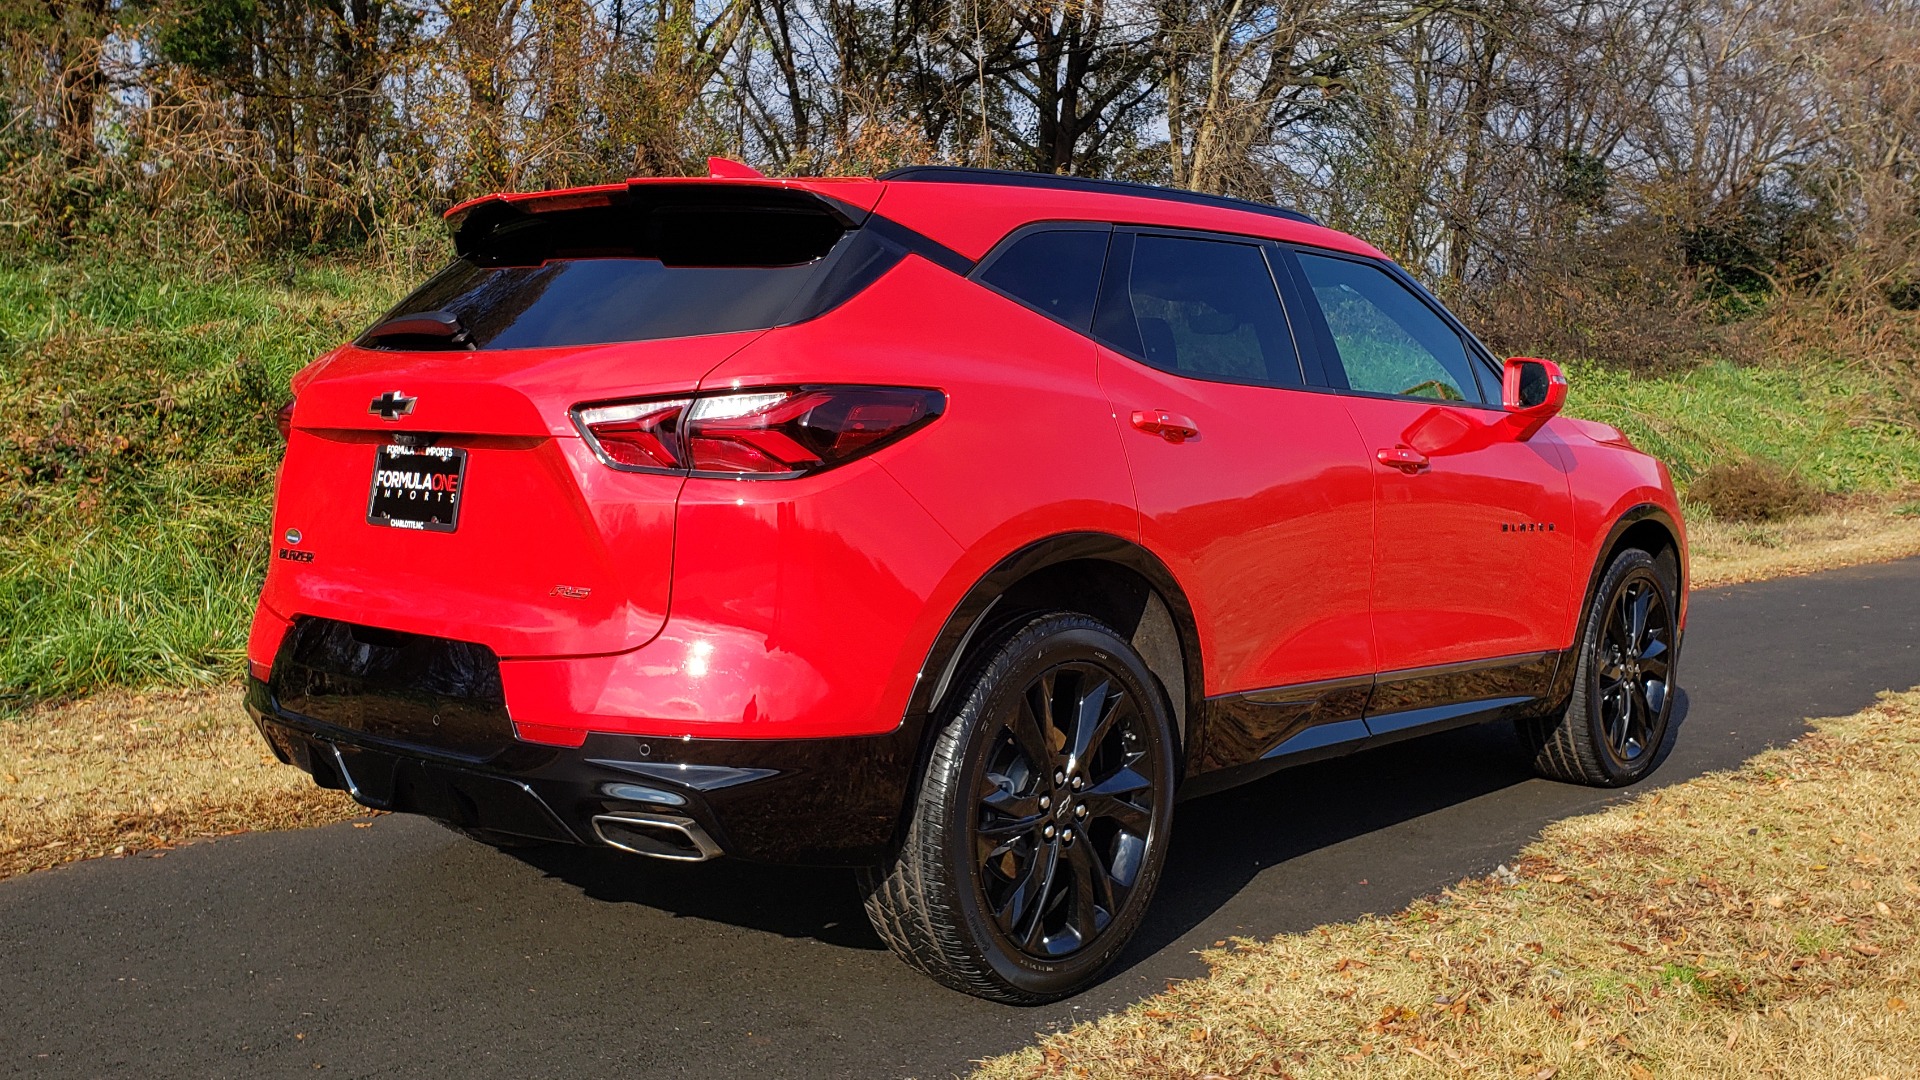 Used 2020 Chevrolet BLAZER RS / 3.6L V6 / 9-SPD AUTO / NAV / BOSE / HTD STS / REARVIEW for sale Sold at Formula Imports in Charlotte NC 28227 8